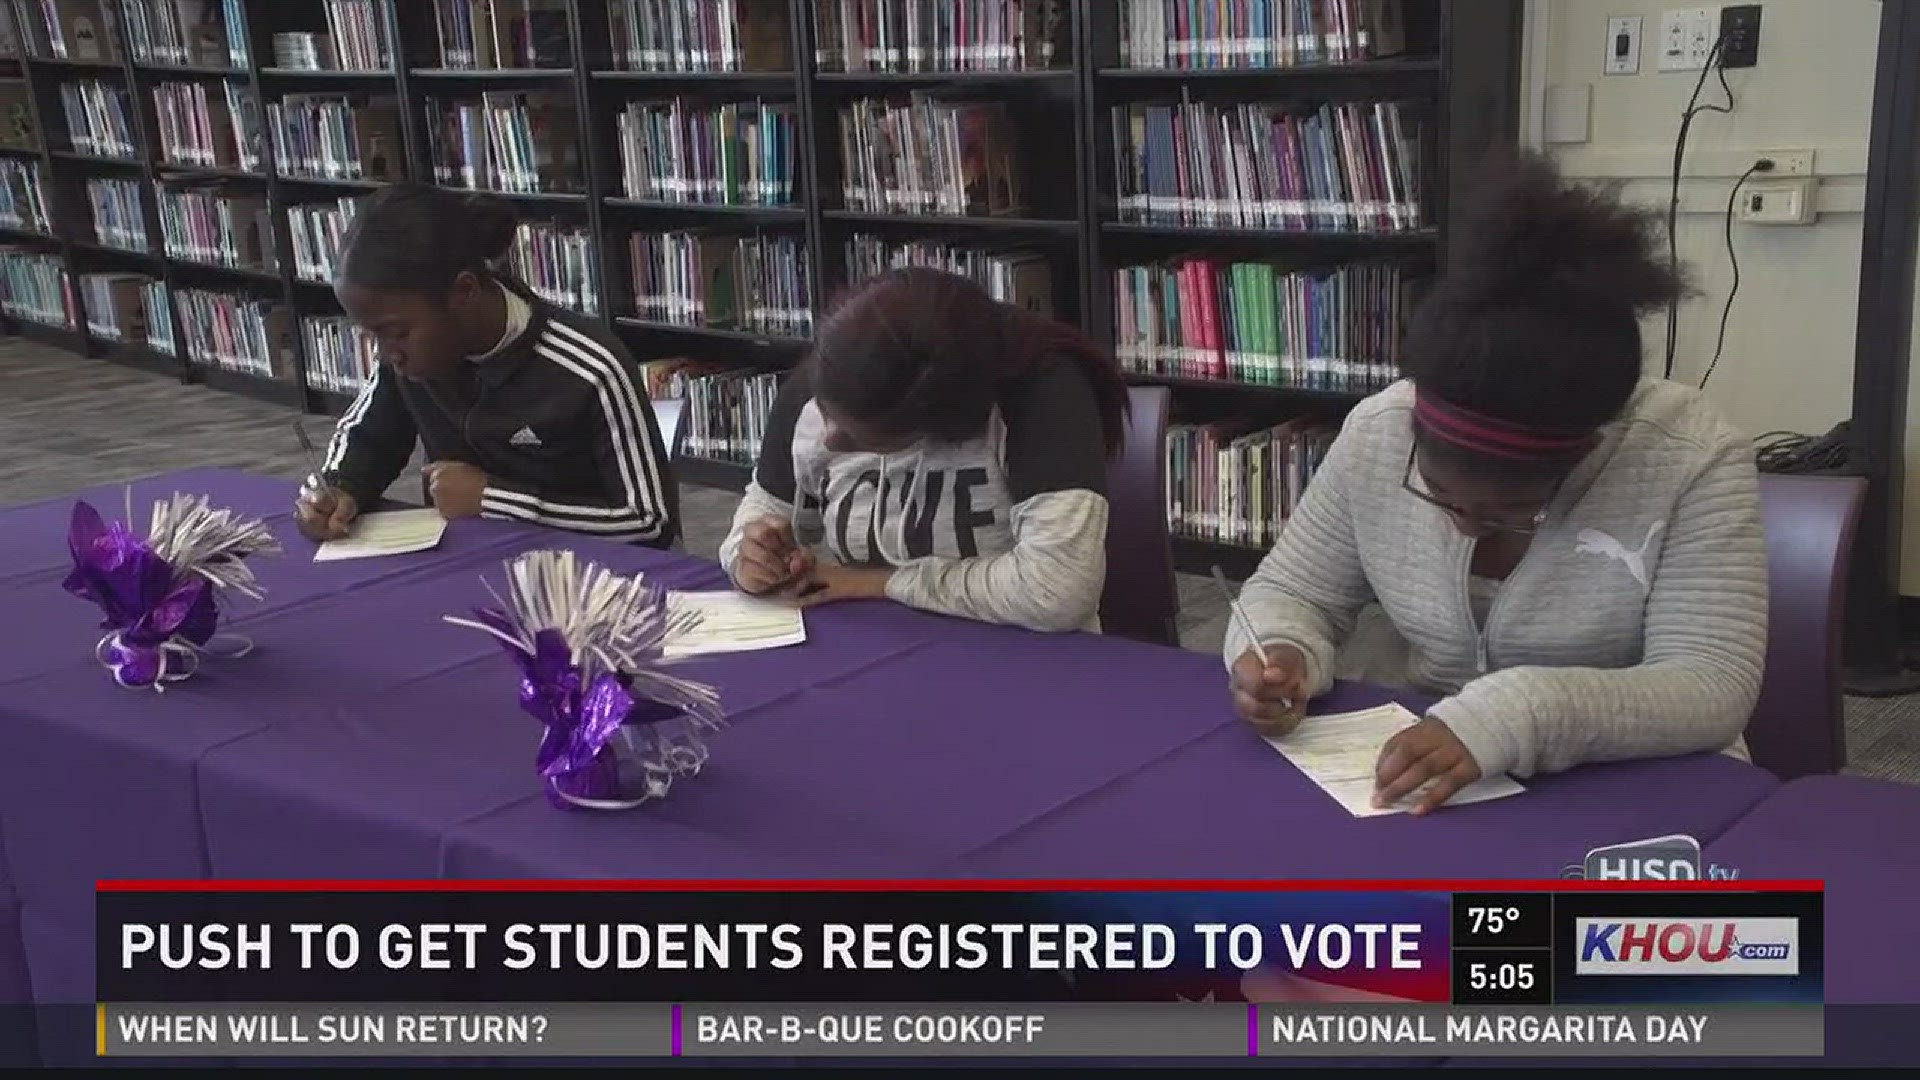 Houston ISD is taking civics lessons to a new level by allowing students who turn 18 to register to vote inside their schools. A voter registration drive held this week ended with dozens of new voters.